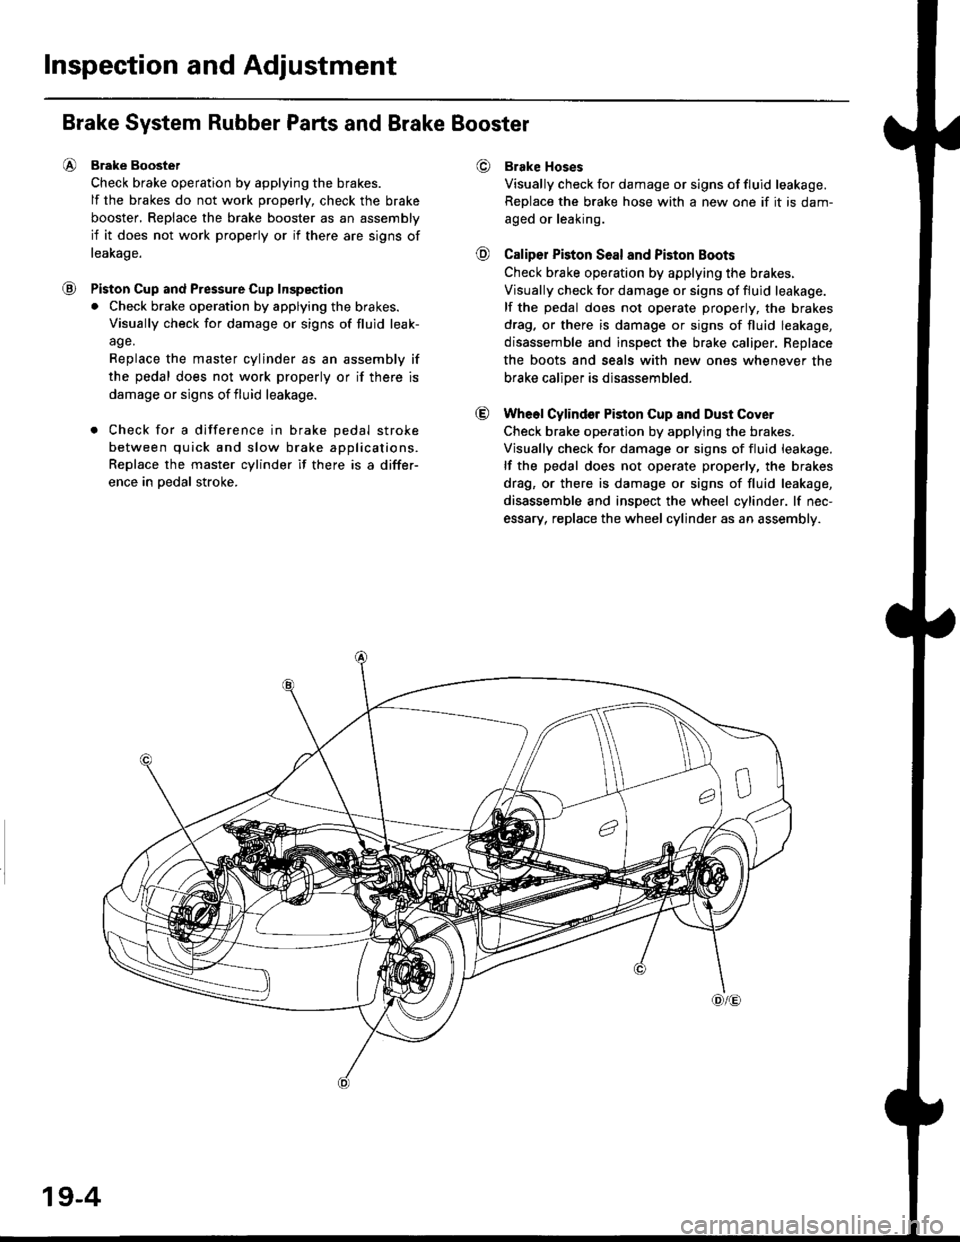 HONDA CIVIC 1997 6.G Owners Manual Inspection and Adjustment
€)
@
@
@
Brake System Rubber Parts and Brake Booster
Brake Boostet
Check brake operation by applying the brakes.
lf the brakes do not work properly, check the brake
booster